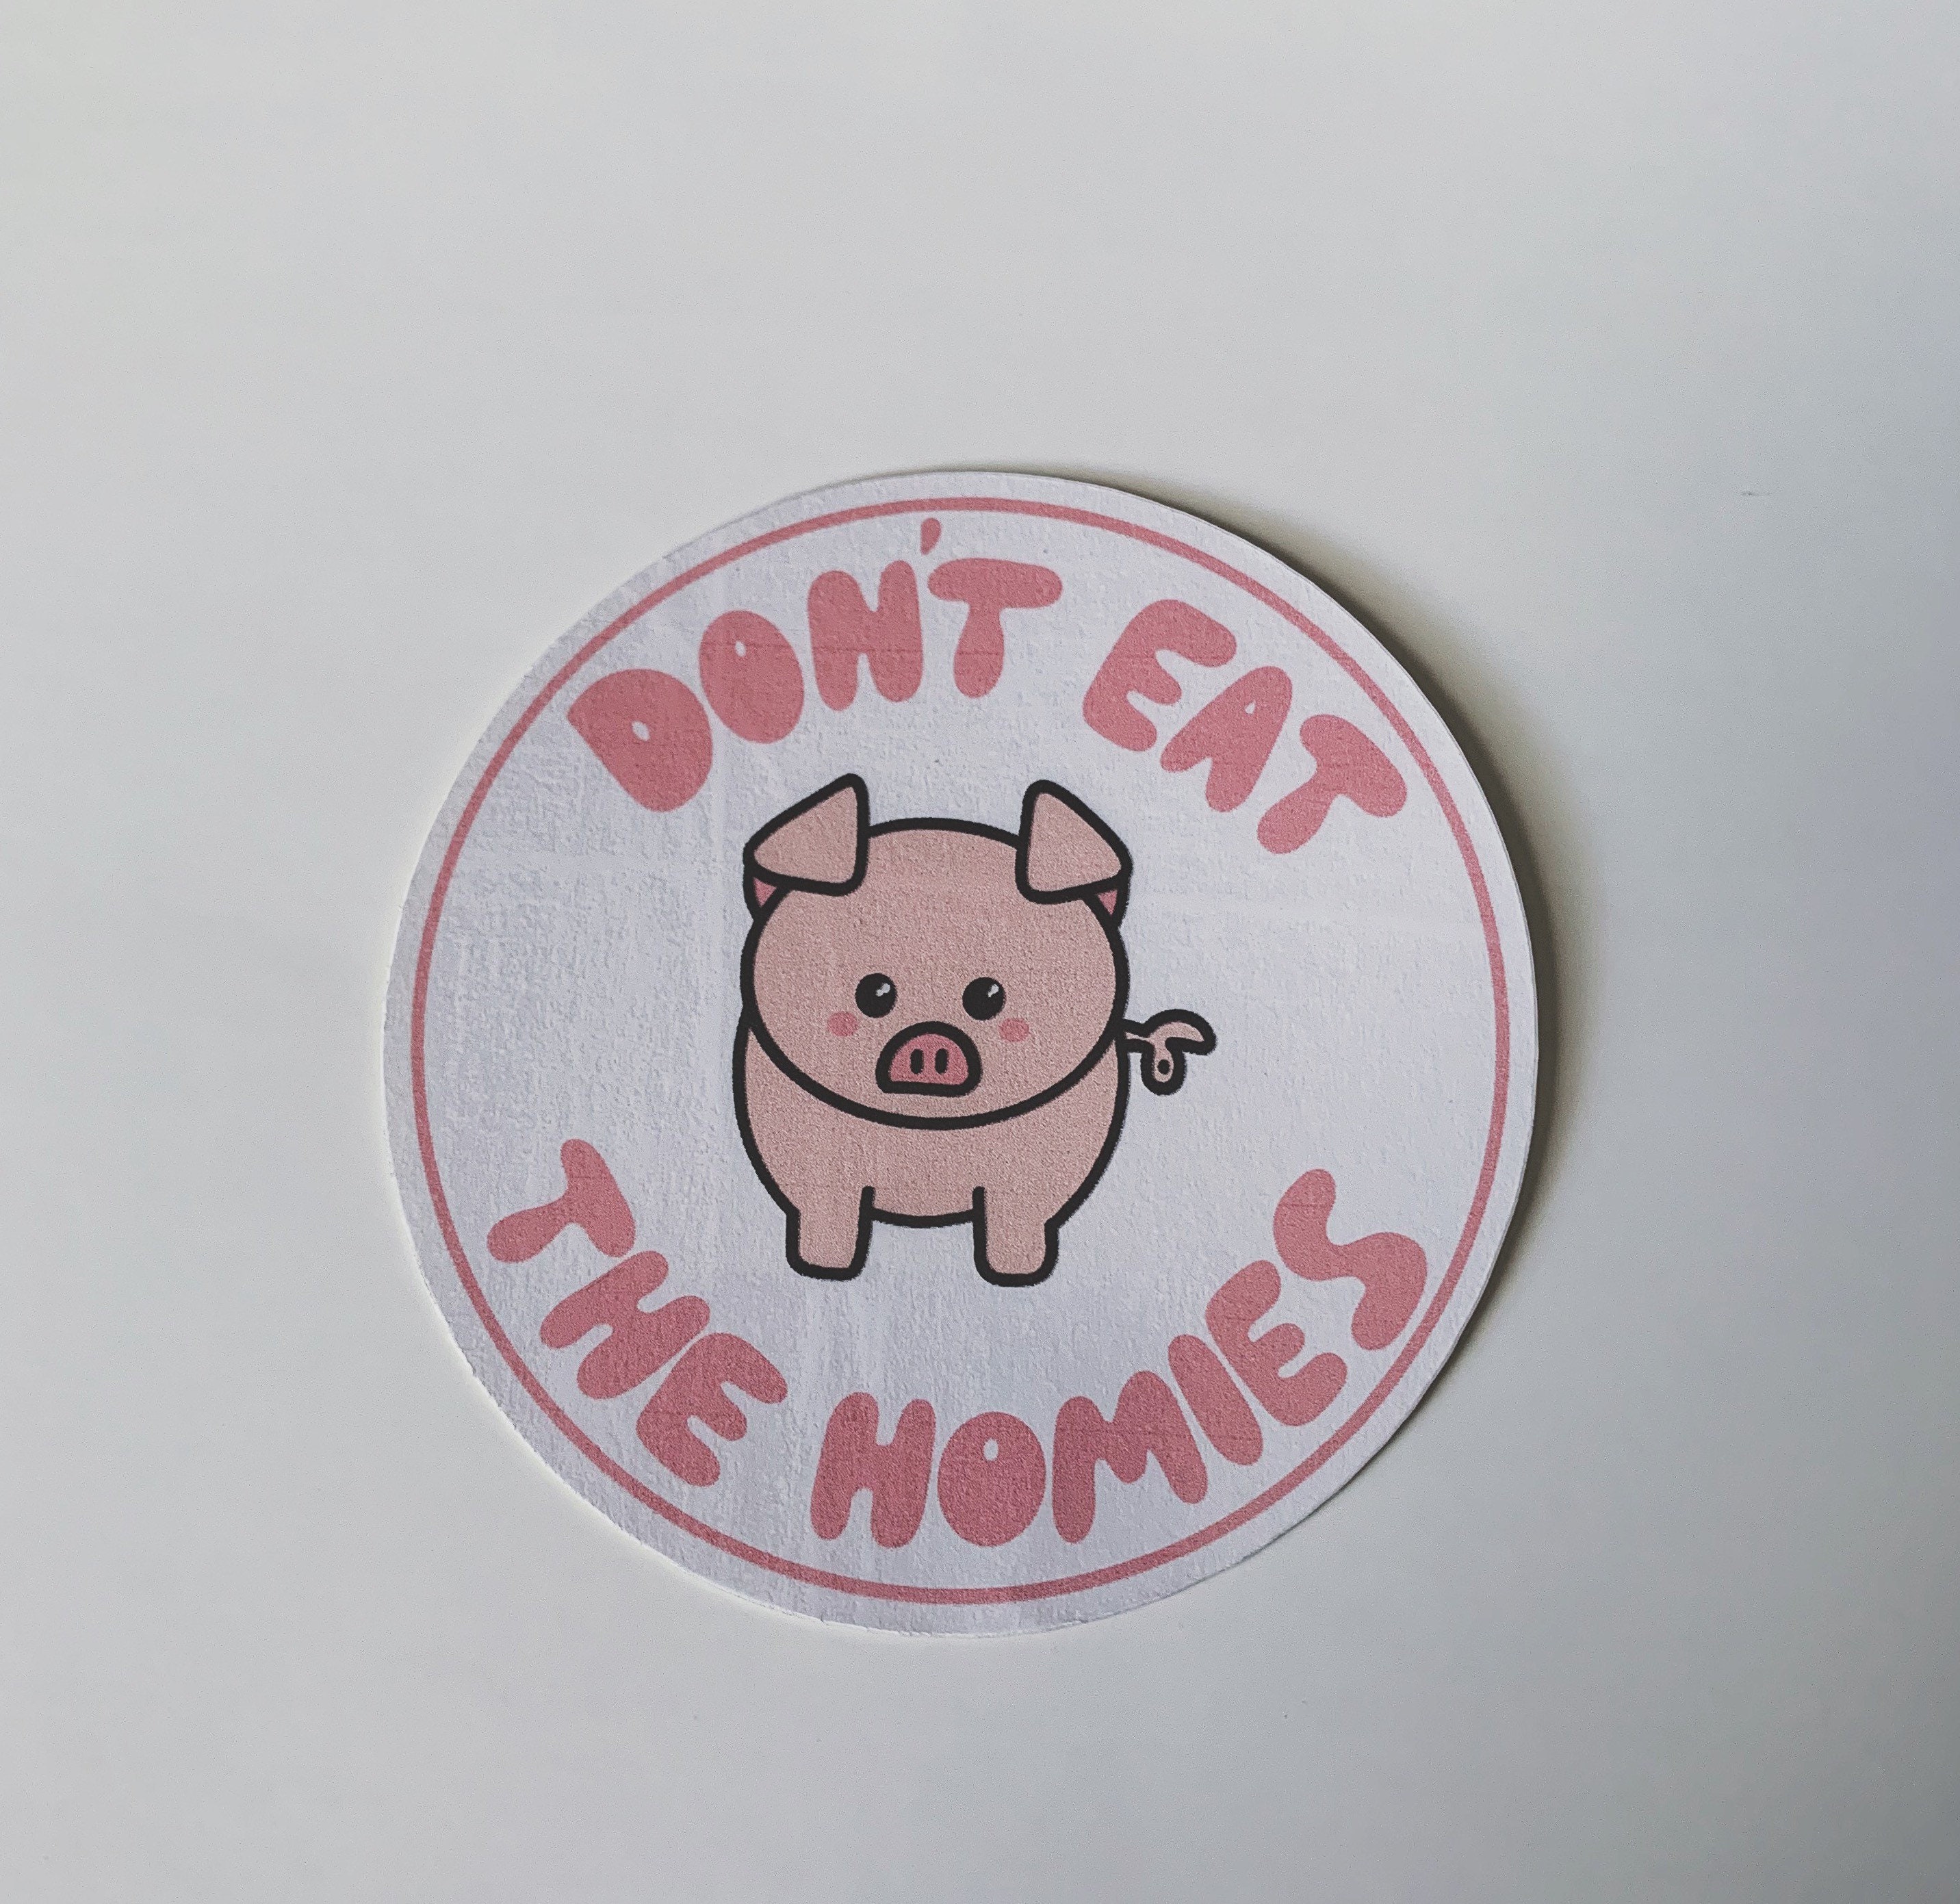 DONT EAT THE HOMIES - BAMBOO UNDERWEAR – Don't Eat The Homies